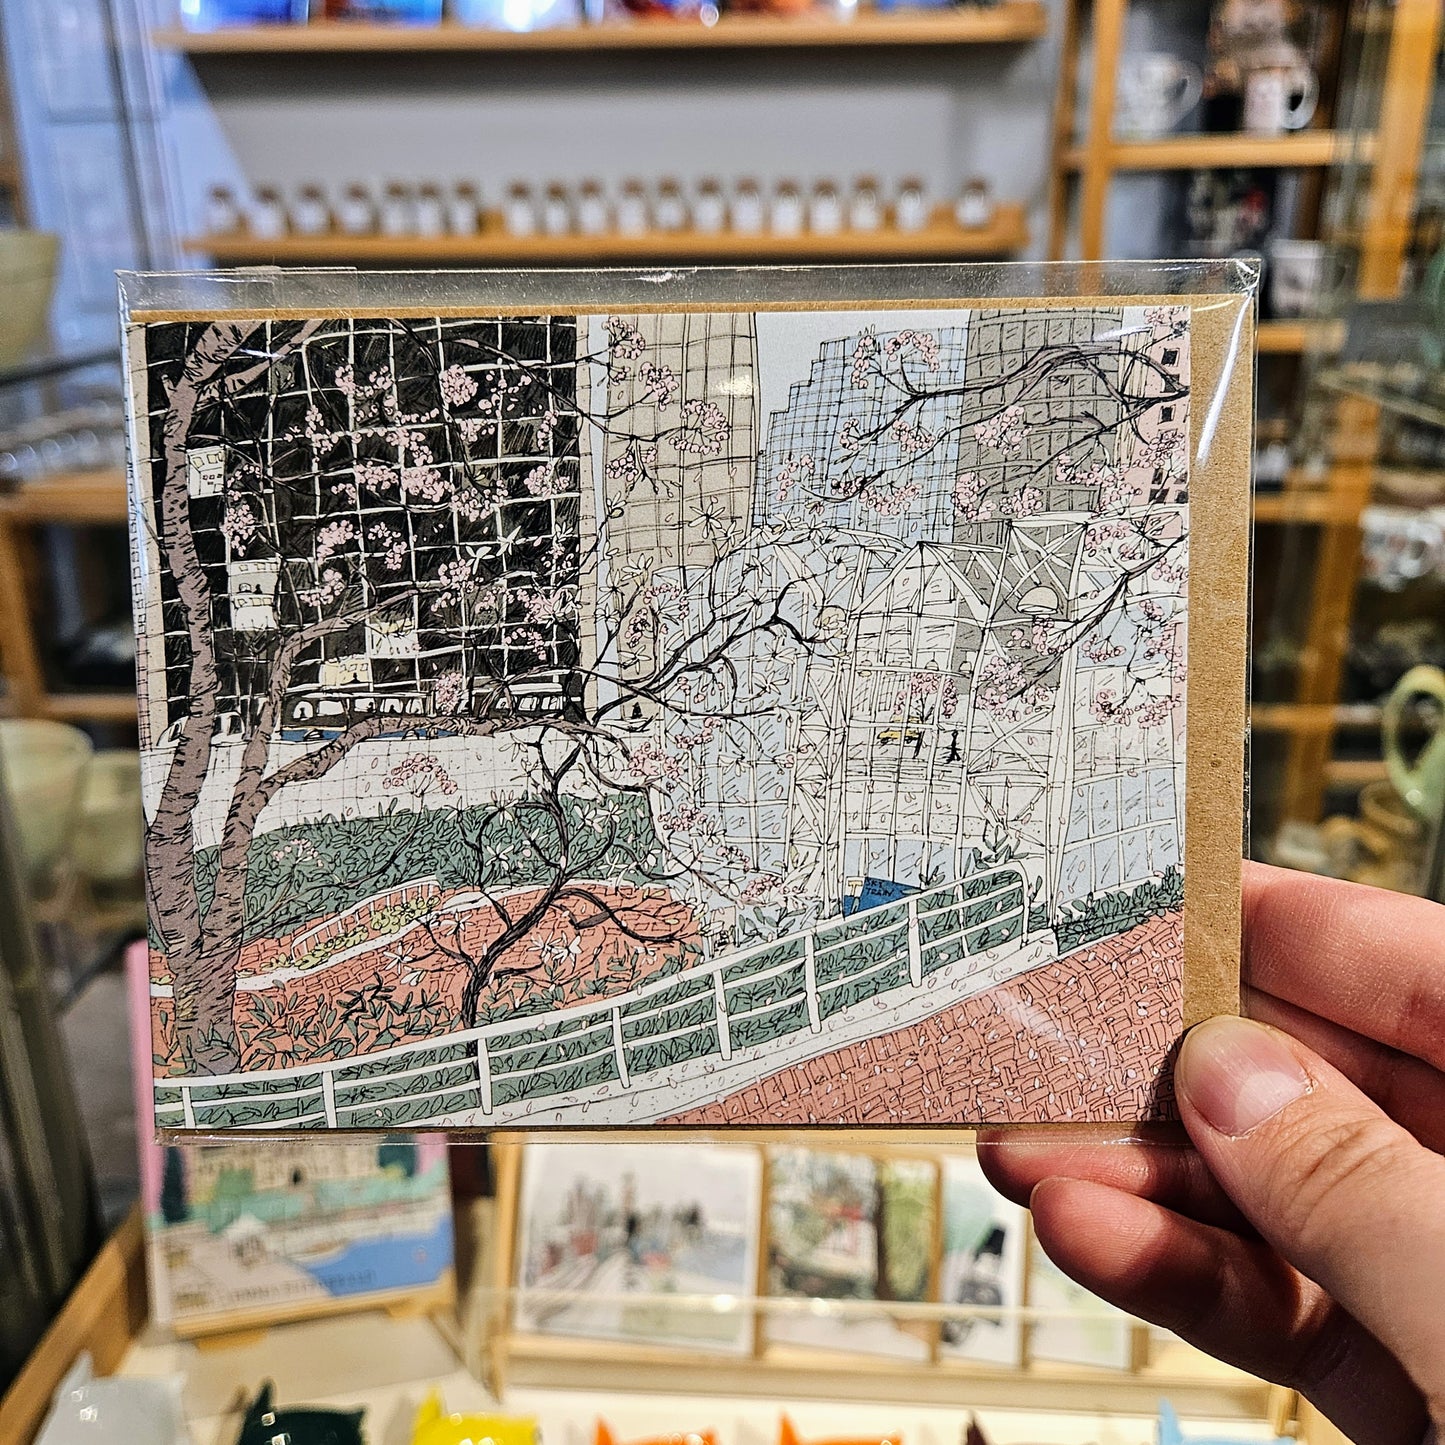 'Cherry Blossoms at Burrard Station', Vancouver Card